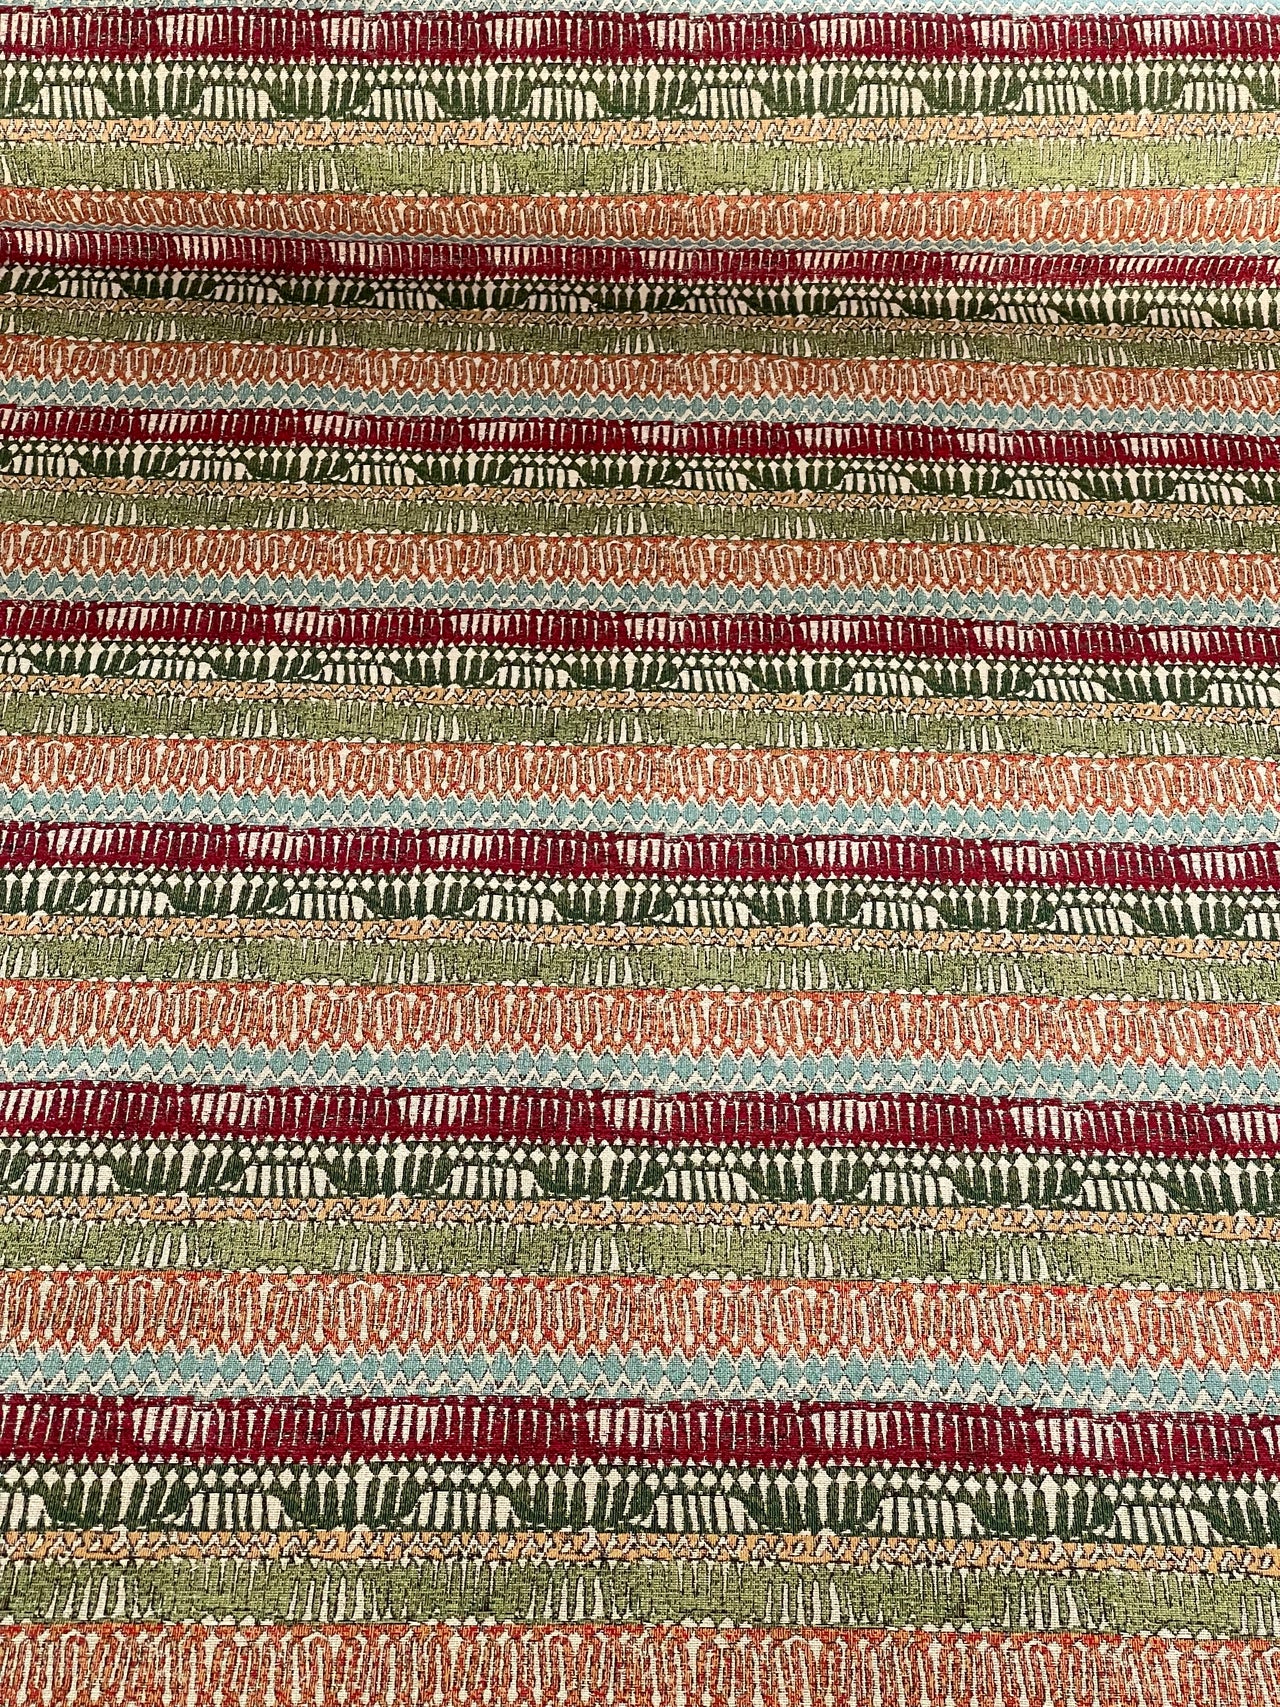 Moroccan-Inspired Kilim Fabric: Old Afghan Rug Style in Cherry Red, Blue, and Green - Perfect for Unique Home Decor - Sold by the Metre